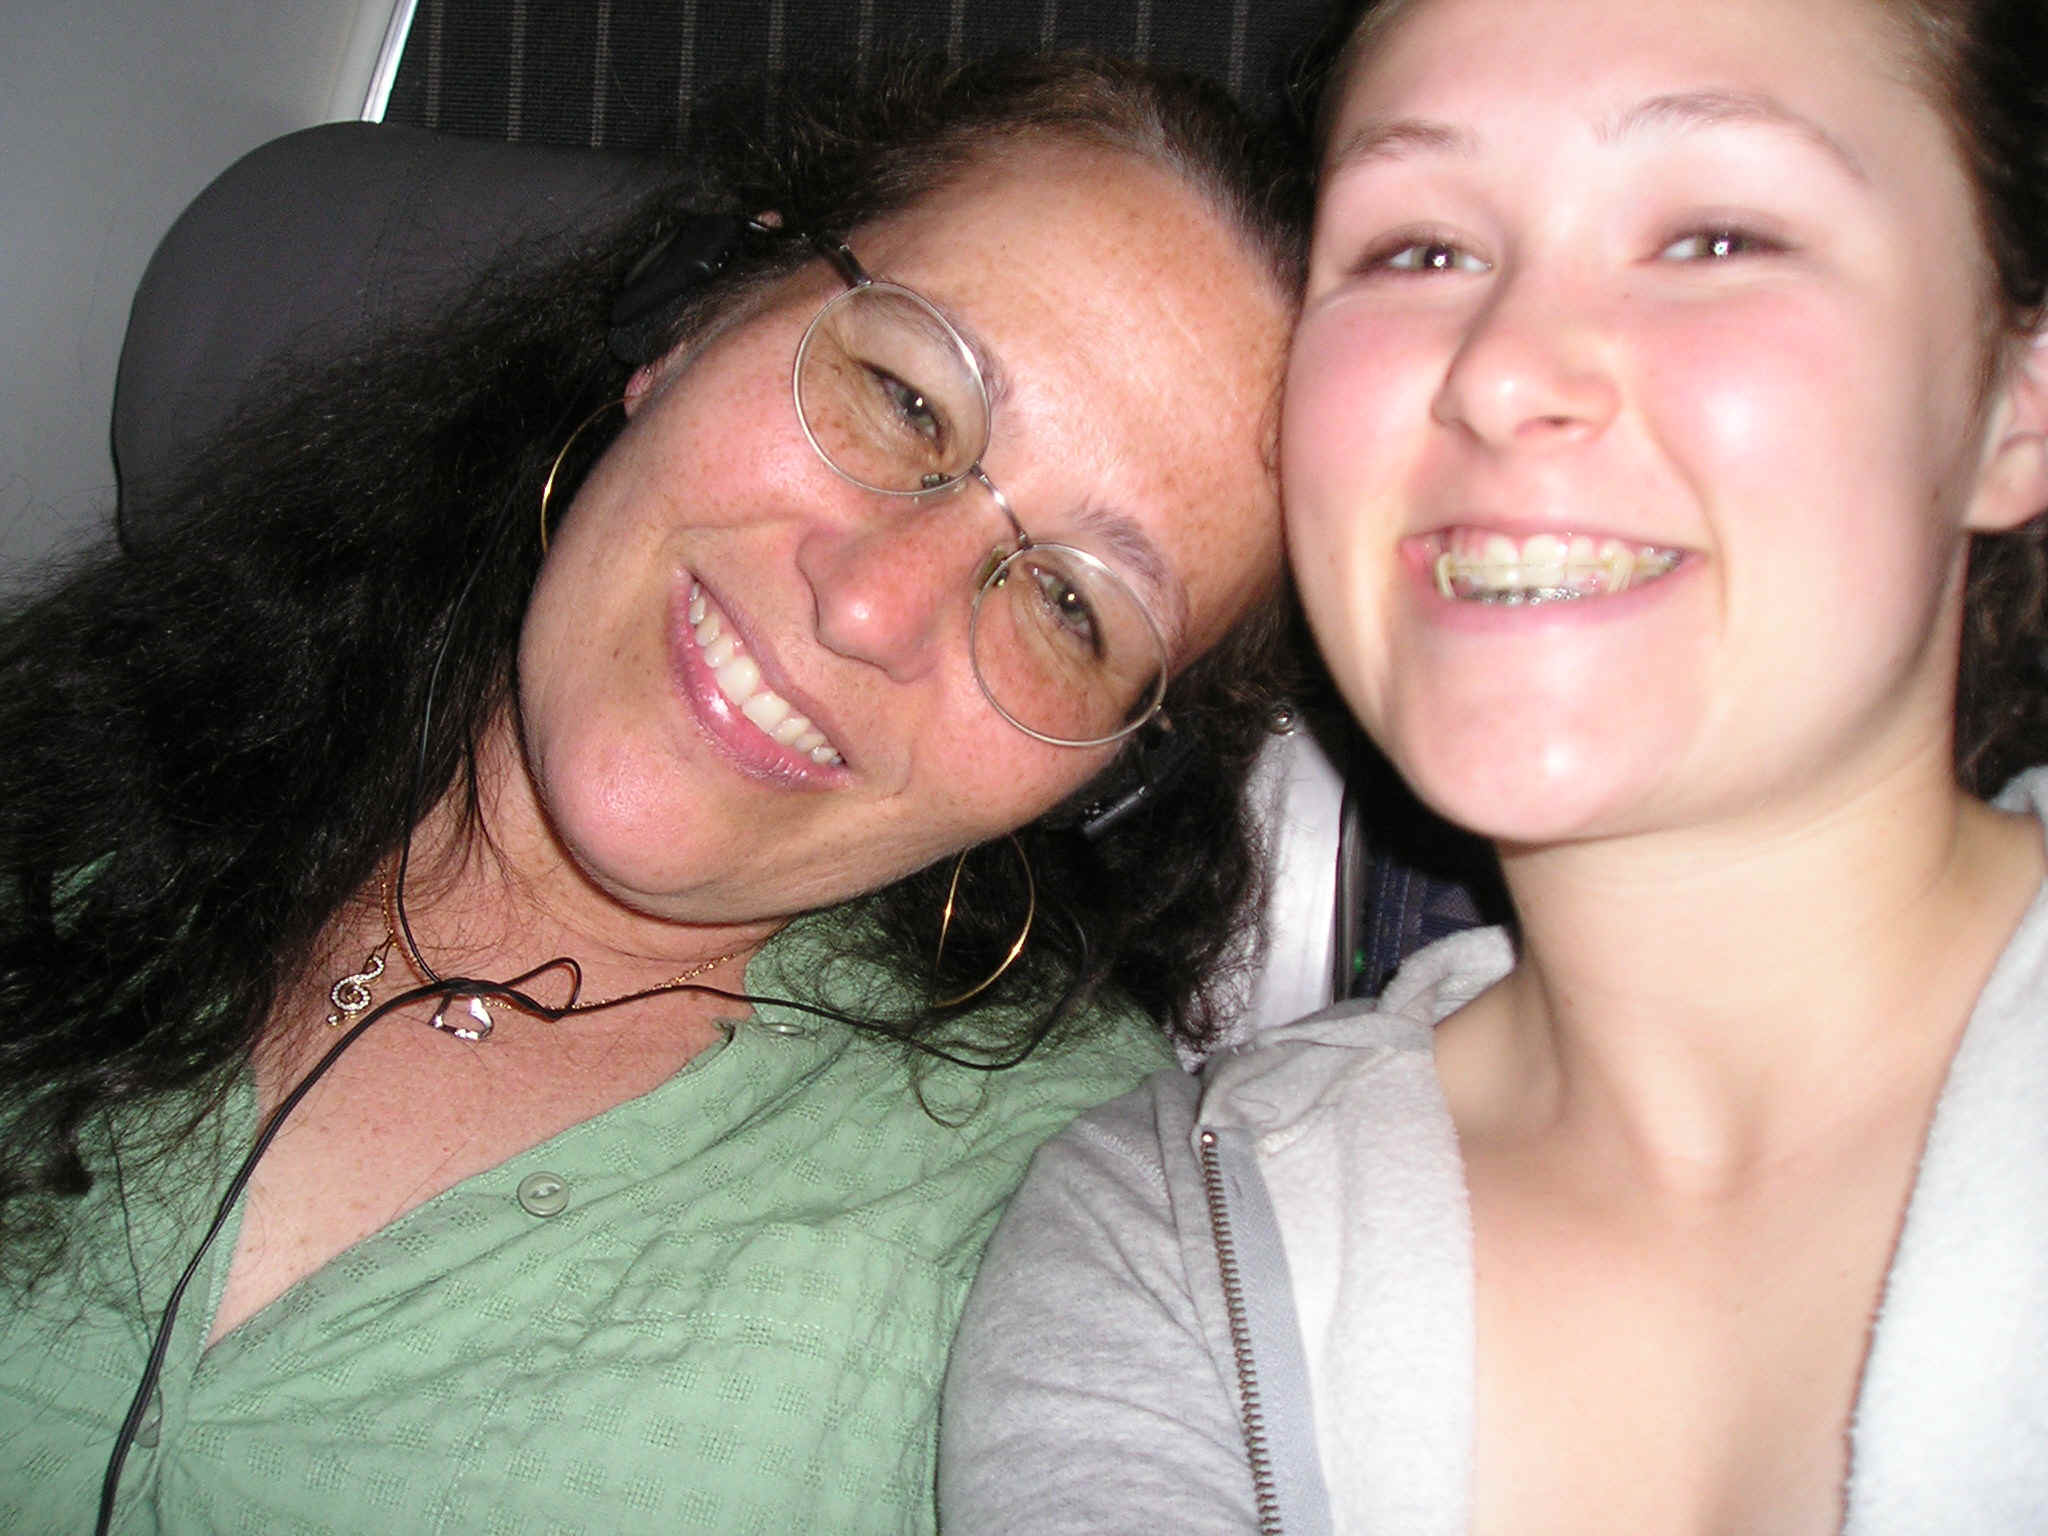 aaa_mother_and_daughter.JPG (621193 bytes)